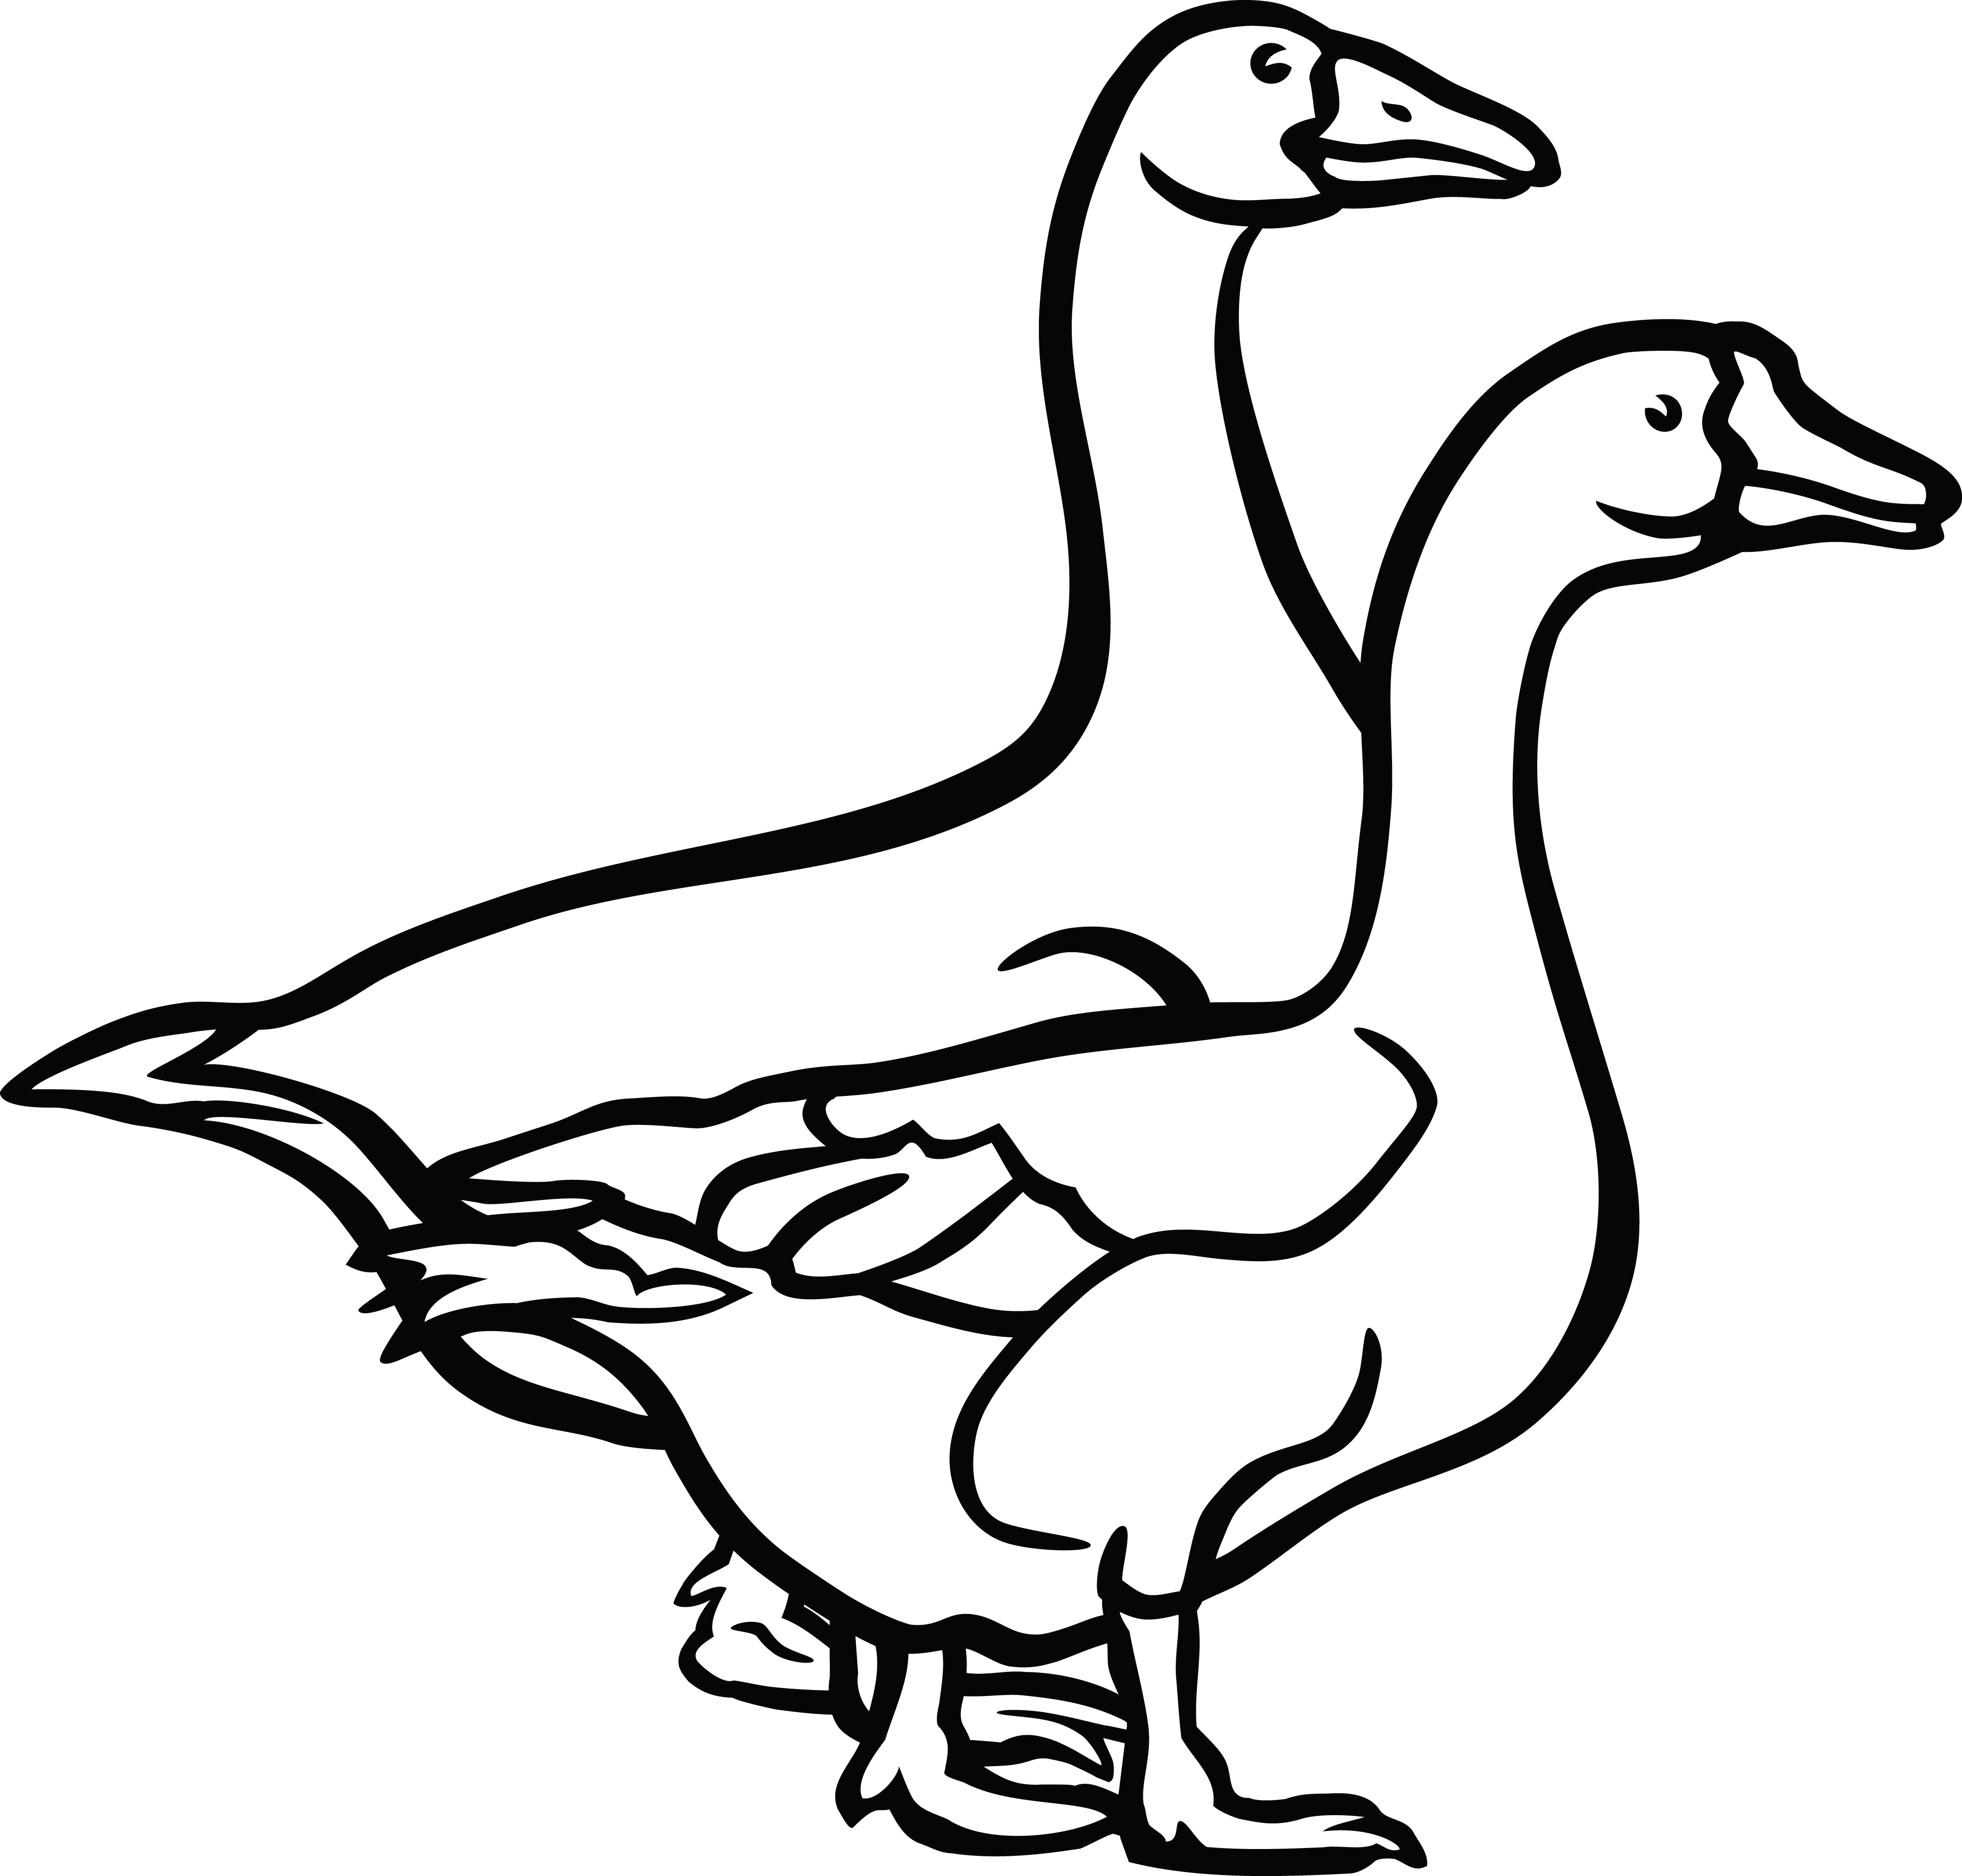 goose clipart black and white - photo #7